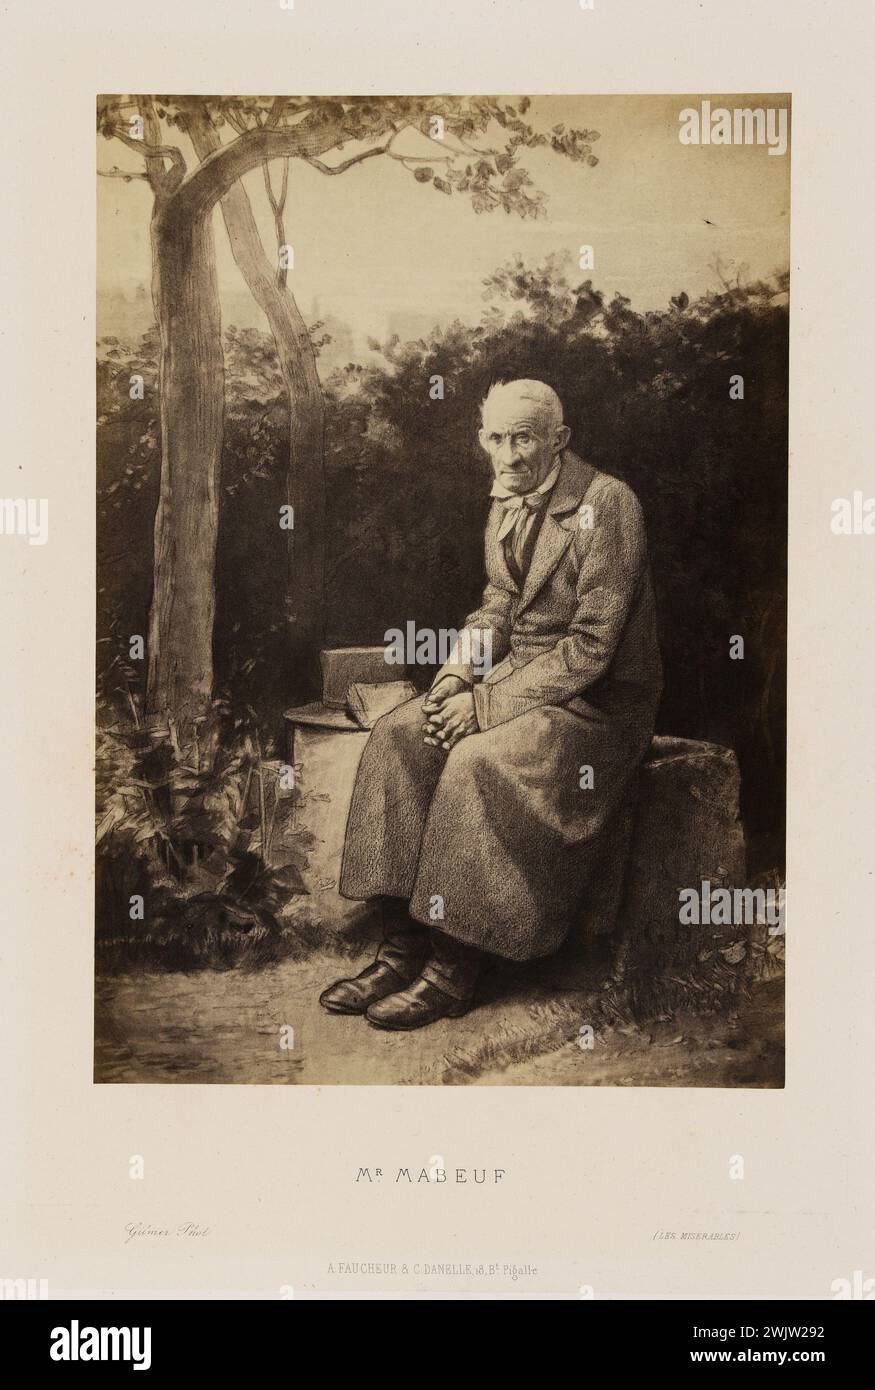 Gustave Brion. Mr. Mabeuf, illustration for 'the miserable'. Photograph Briquet/ Guettard, after a drawing by Brion, 1862. Paris, house of Victor Hugo. 38140-1 Seated, drawing, man age, illustration of literary work, novel character, old man Stock Photo